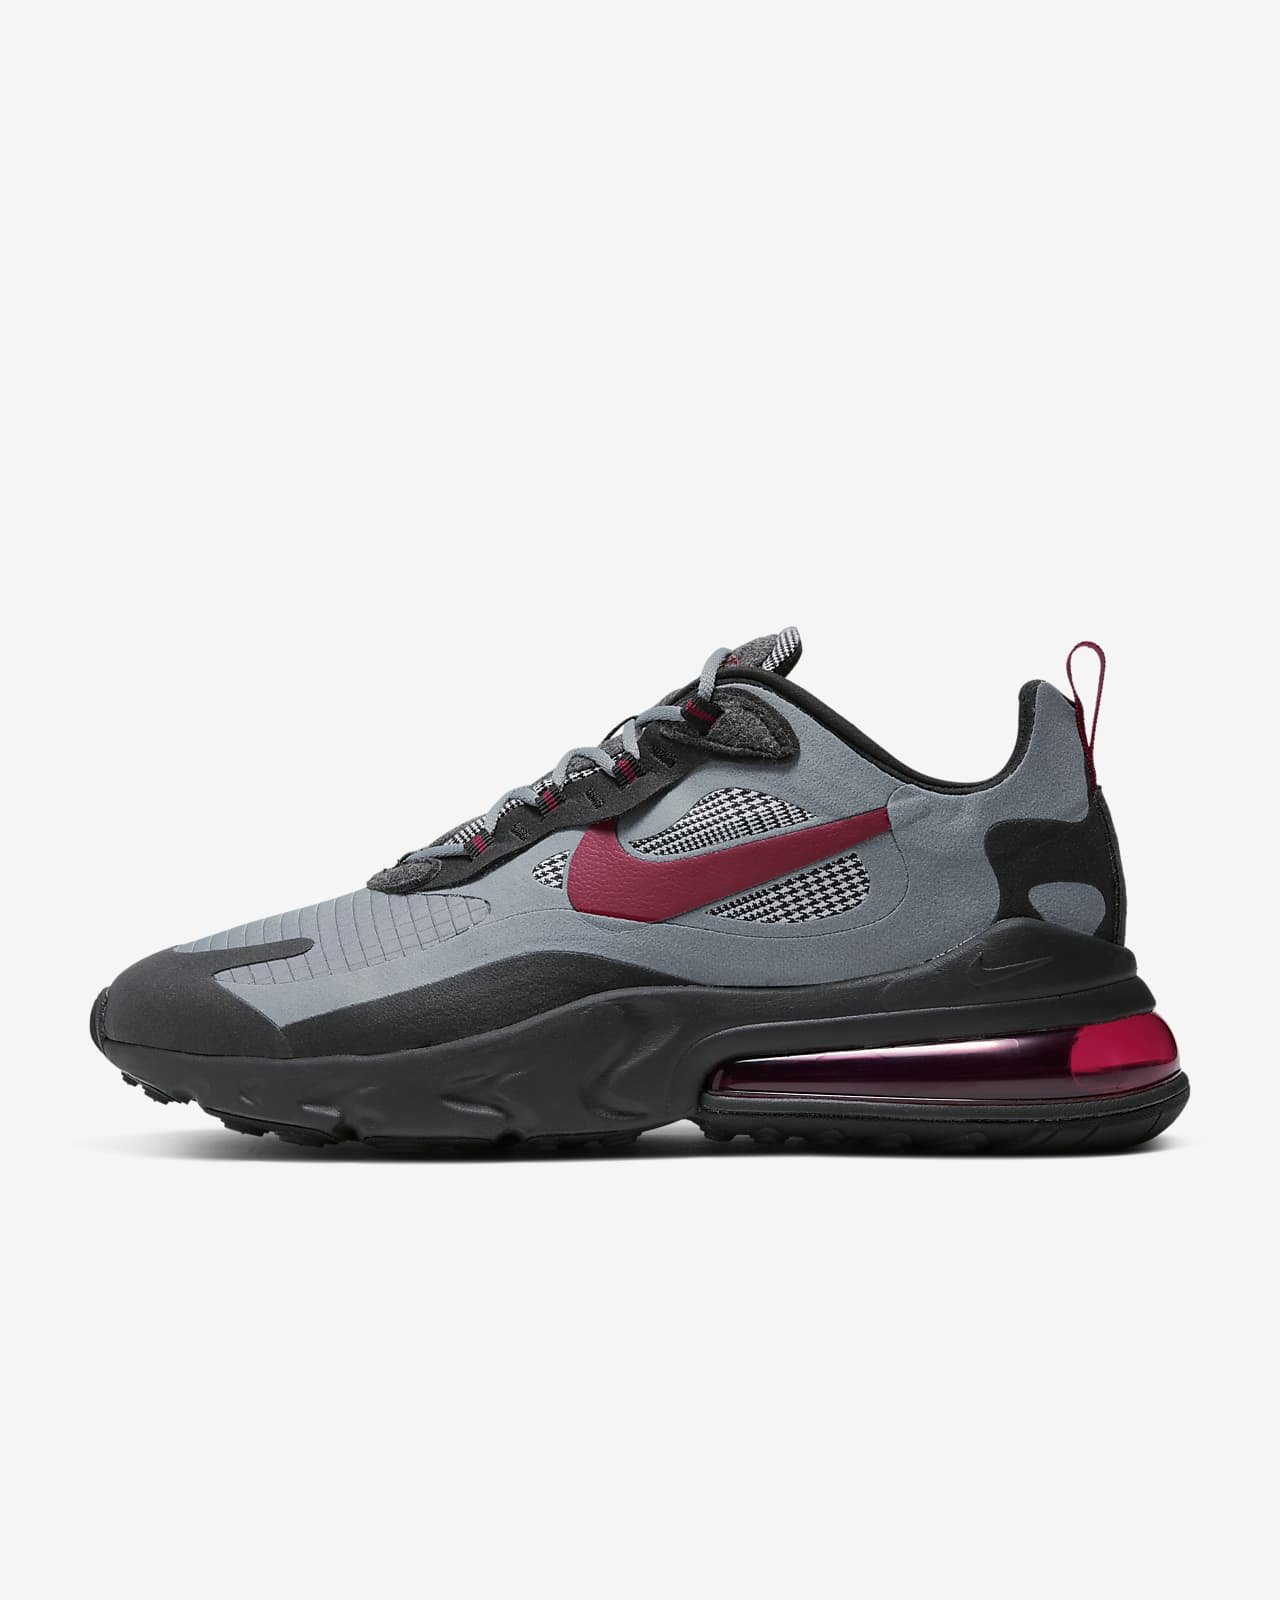 red and black nike air max 270